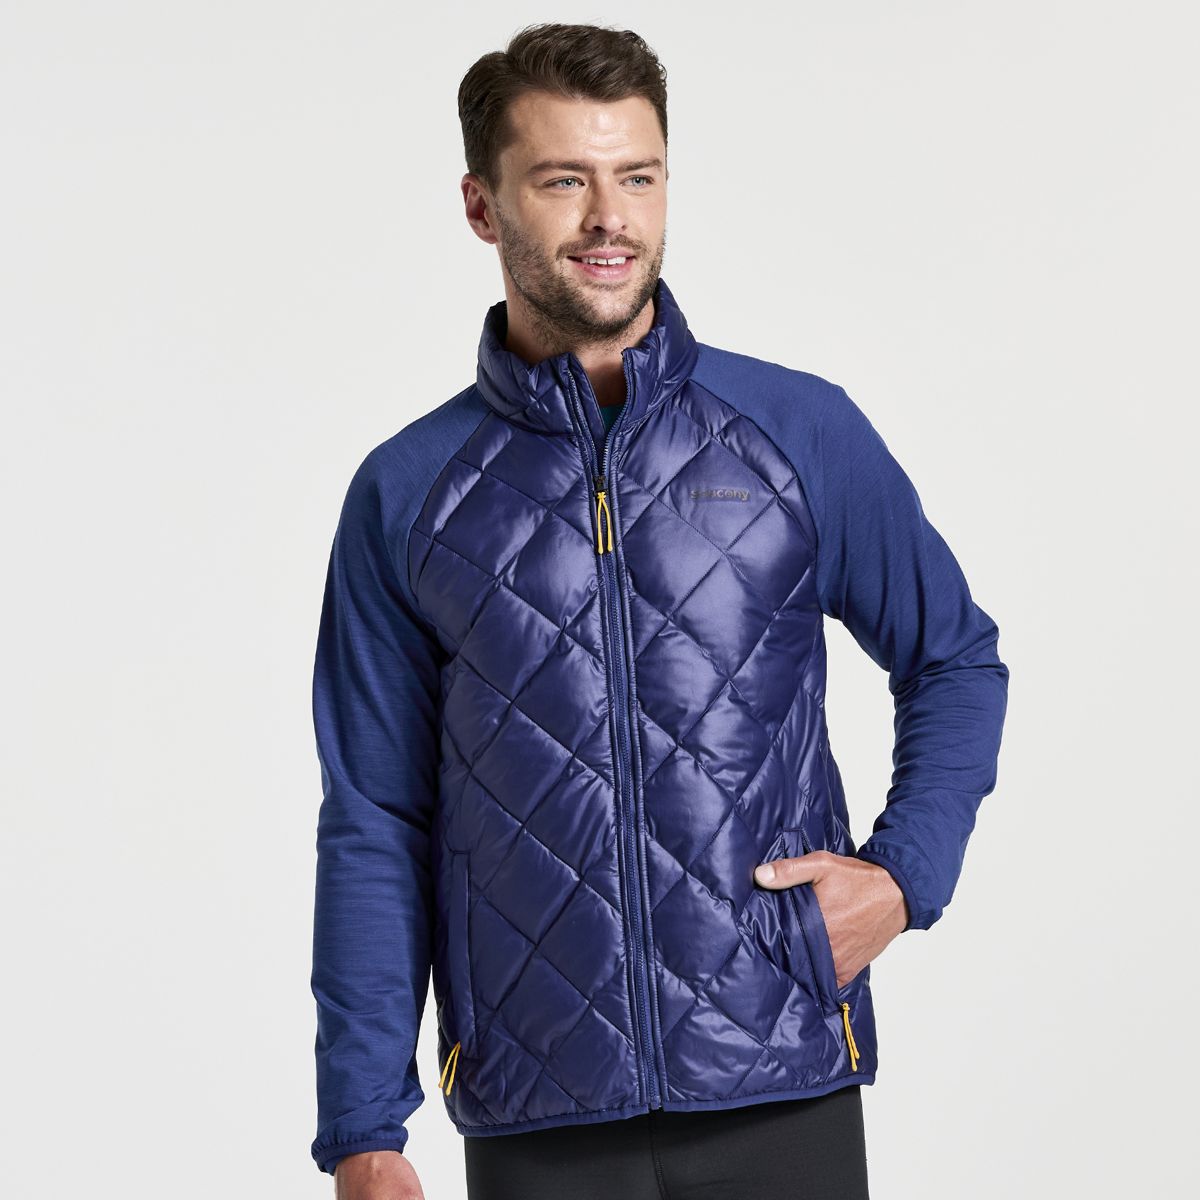 The quilted jacket is the staple to see you through winter